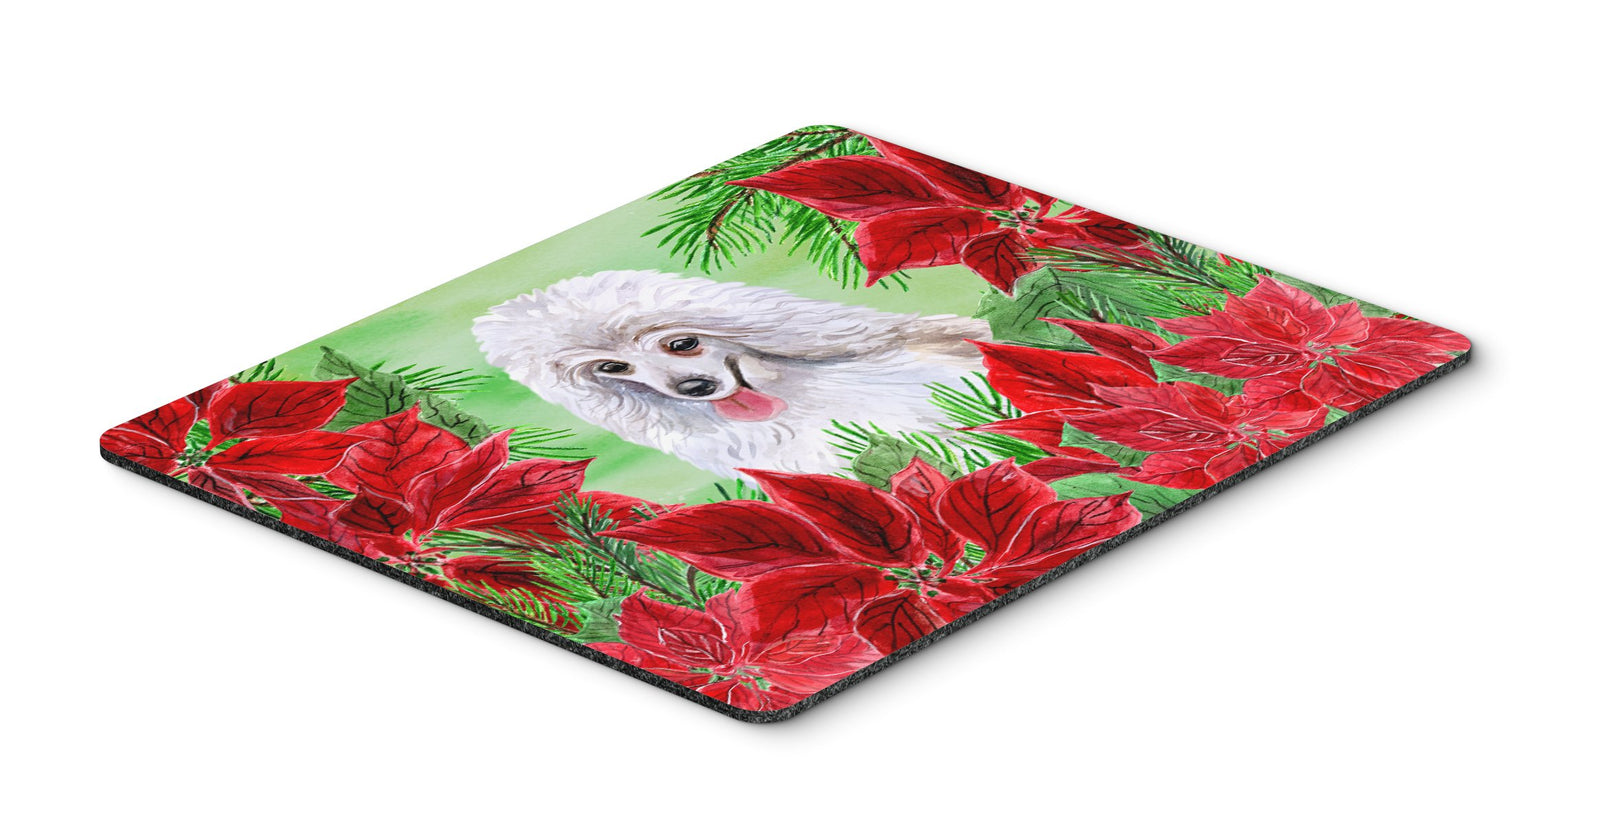 Medium White Poodle Poinsettas Mouse Pad, Hot Pad or Trivet CK1331MP by Caroline's Treasures